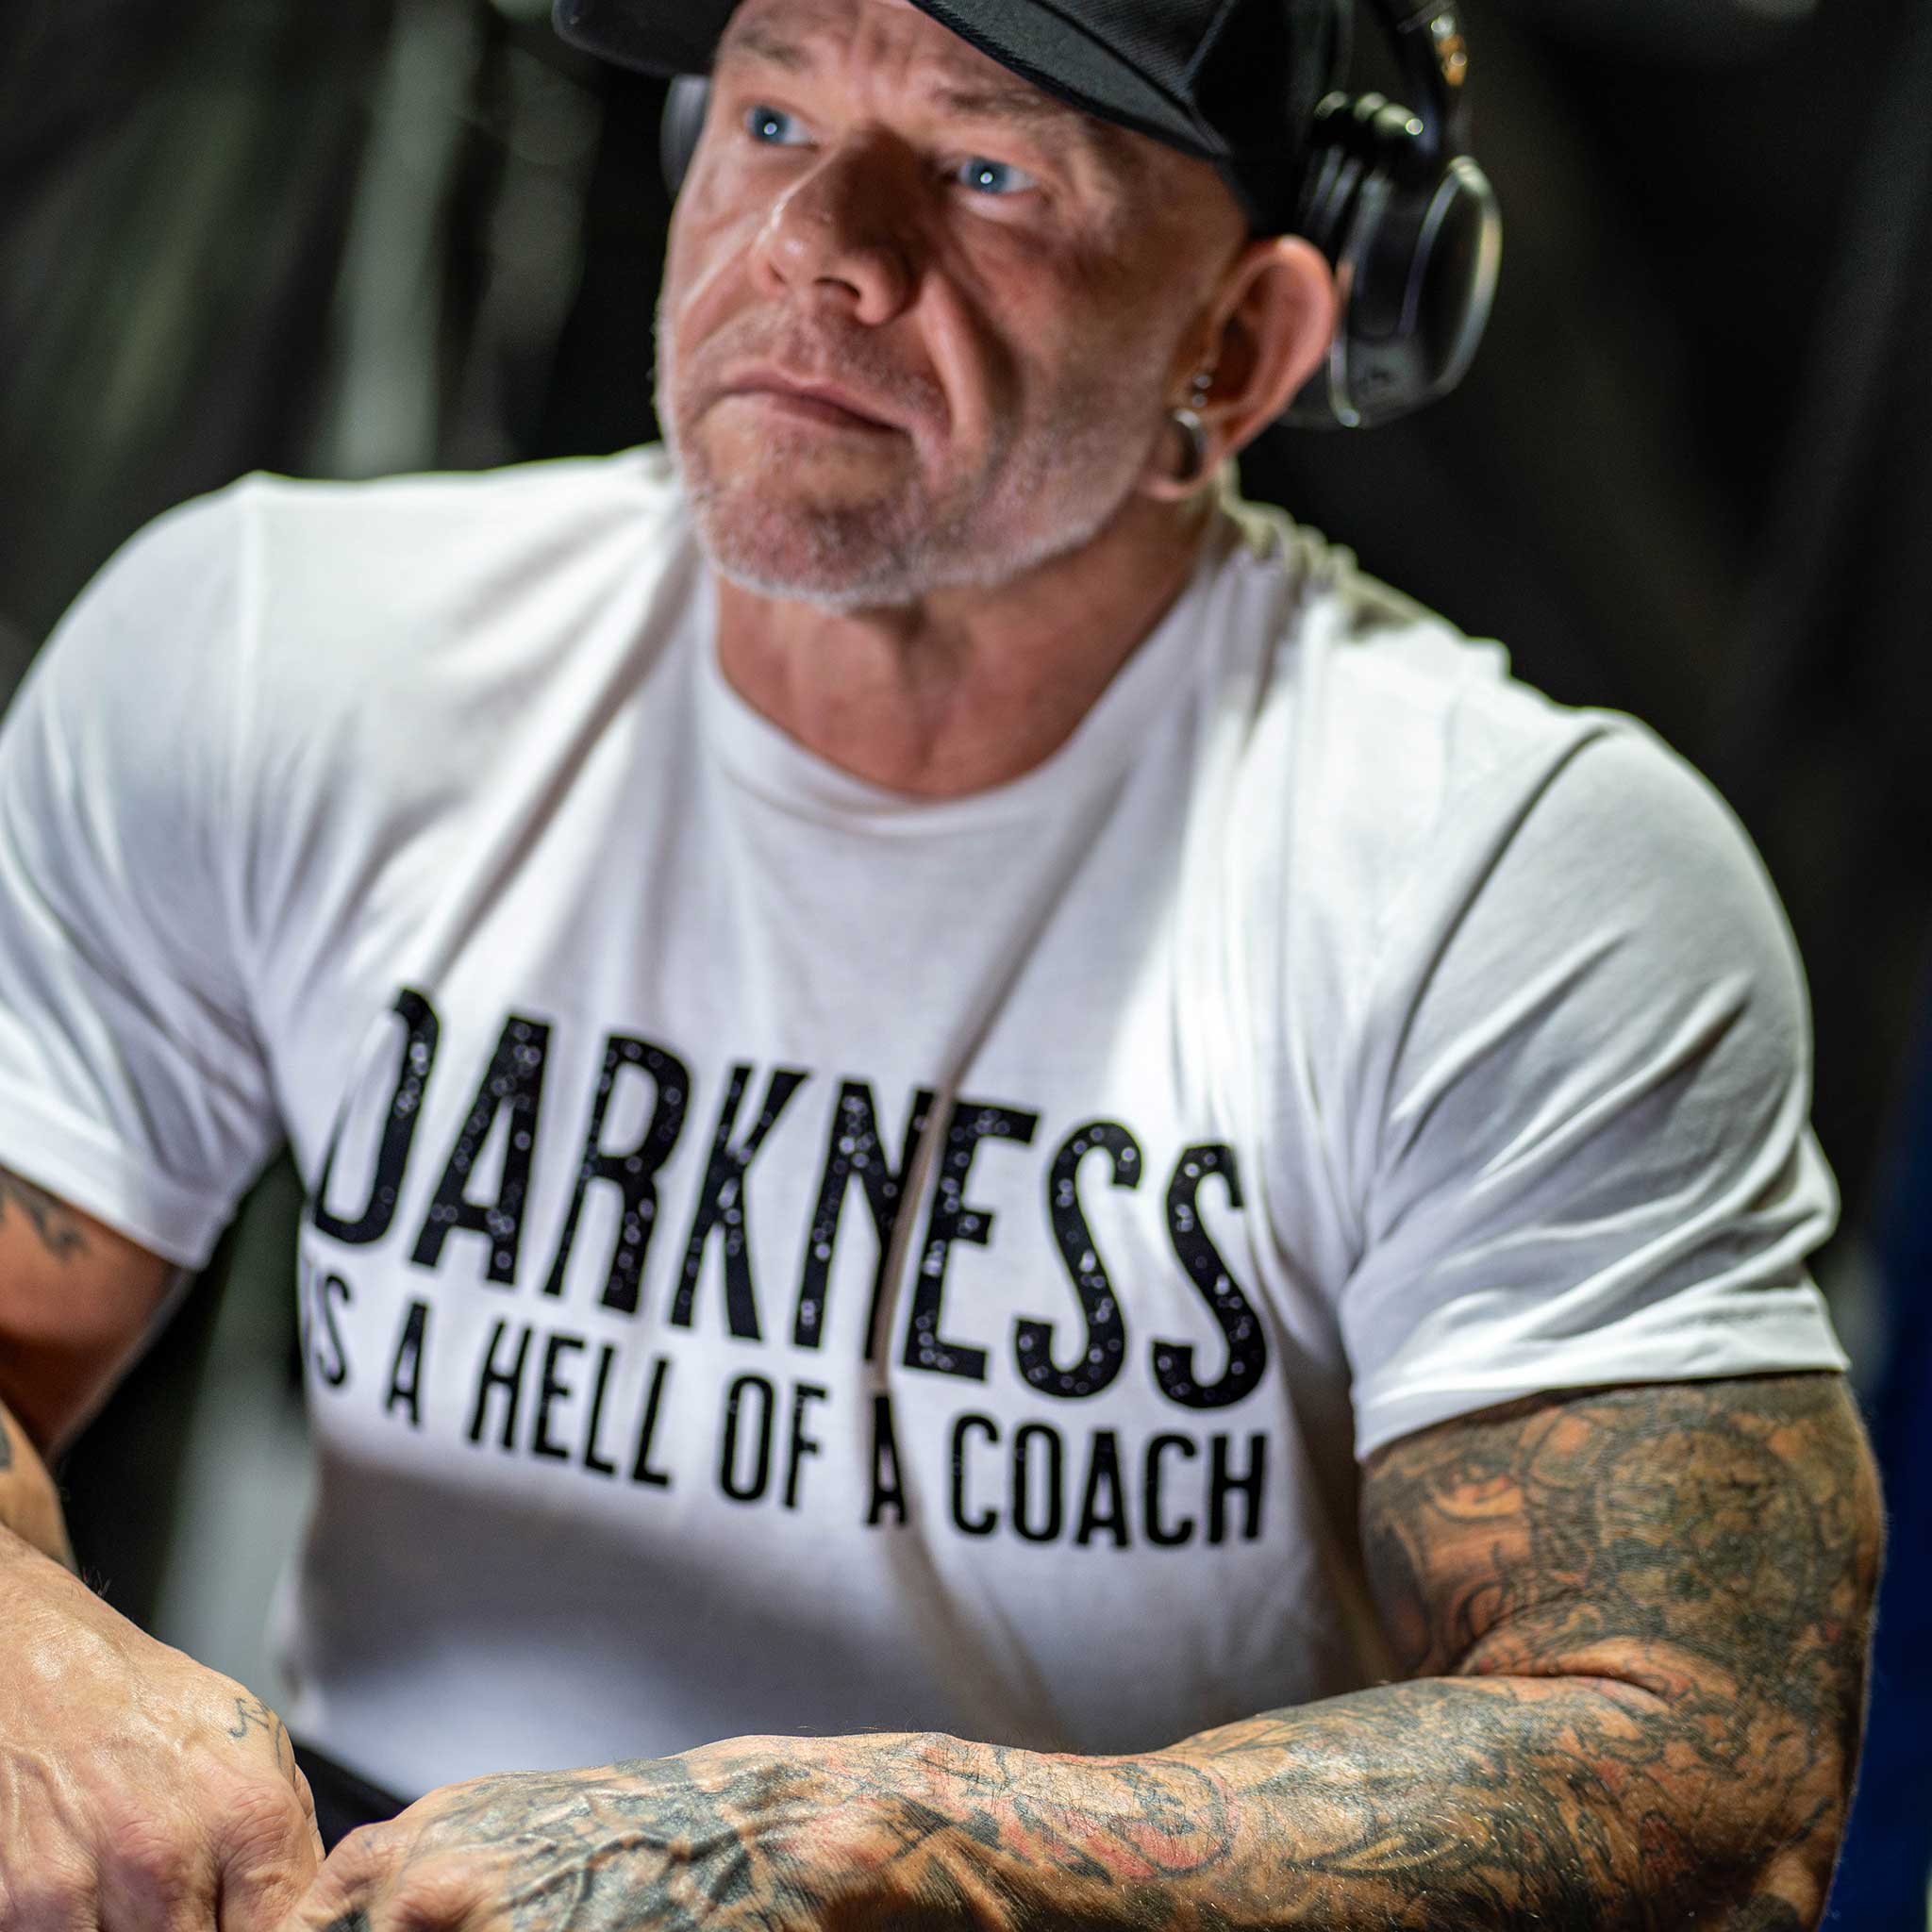 Darkness is a HELL of a Coach - White Edition Tee